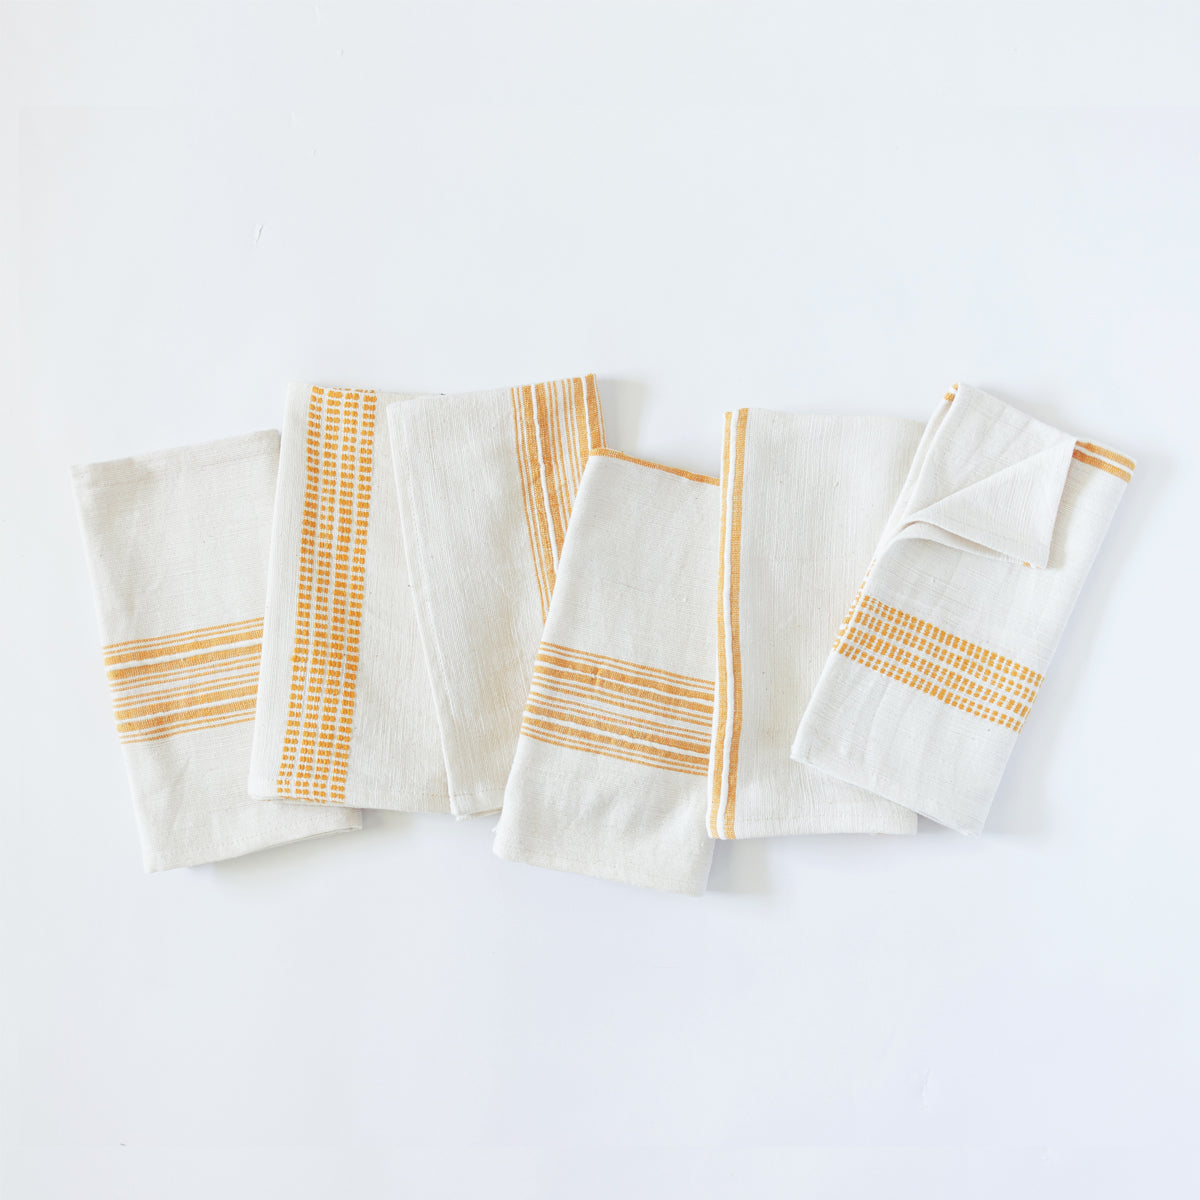 Set of 6 Embroidered Dinner Napkins with Single Initial Adorn Monogram and  Pocket Fold Cloth Napkins by Allison S.